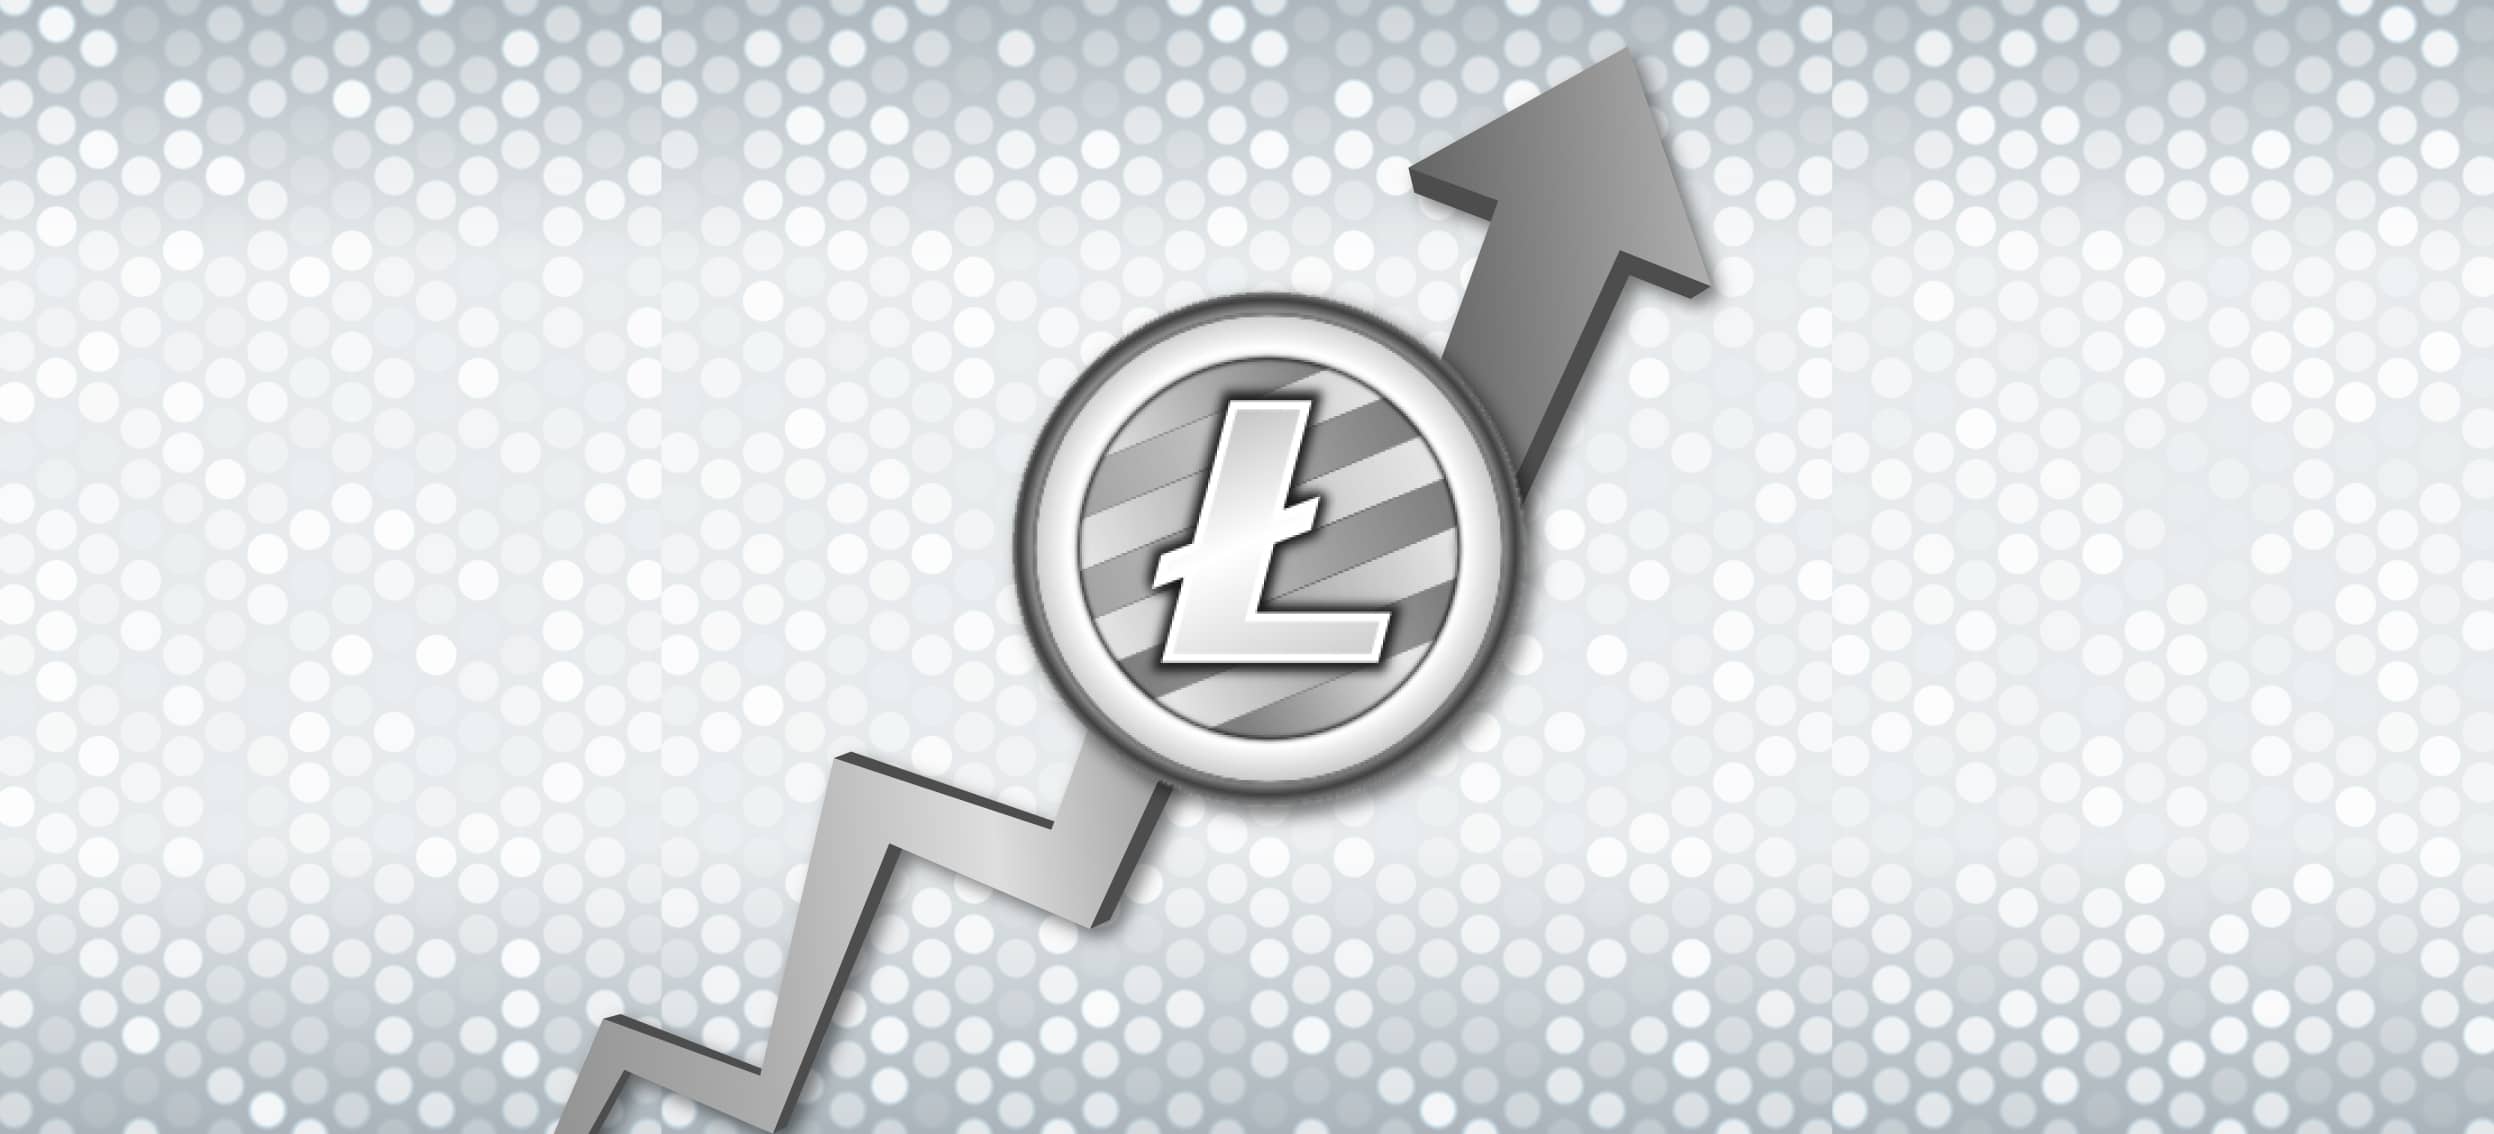 eToro: Litecoin (LTC) Price Could Be a Massive Discount to What it Should be Worth